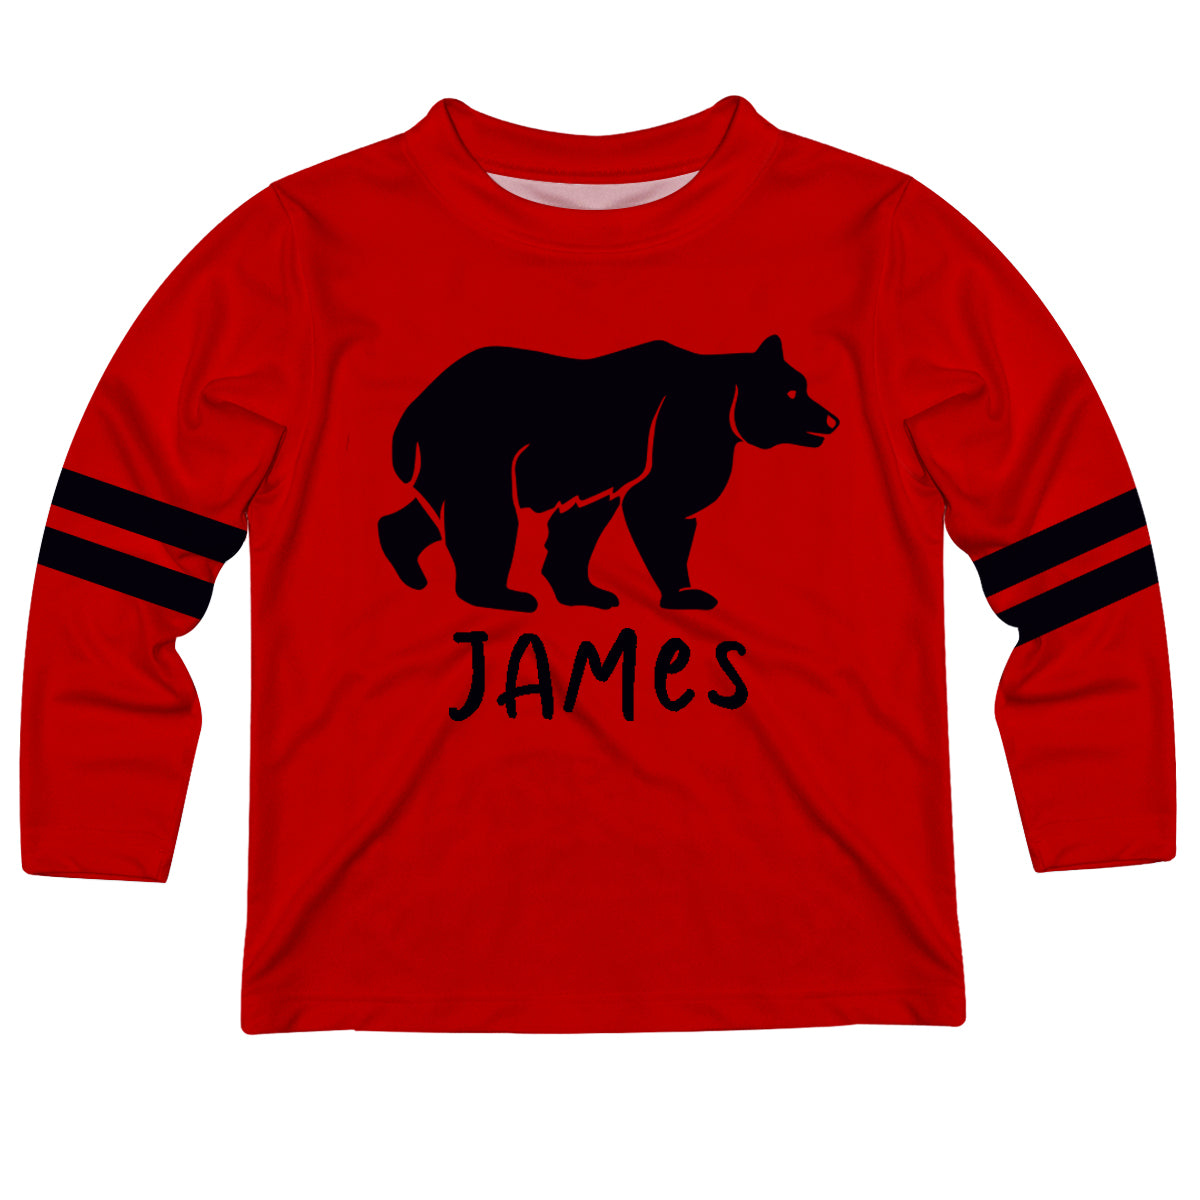 Boys red and black bear long sleeve tee shirt with name - Wimziy&Co.